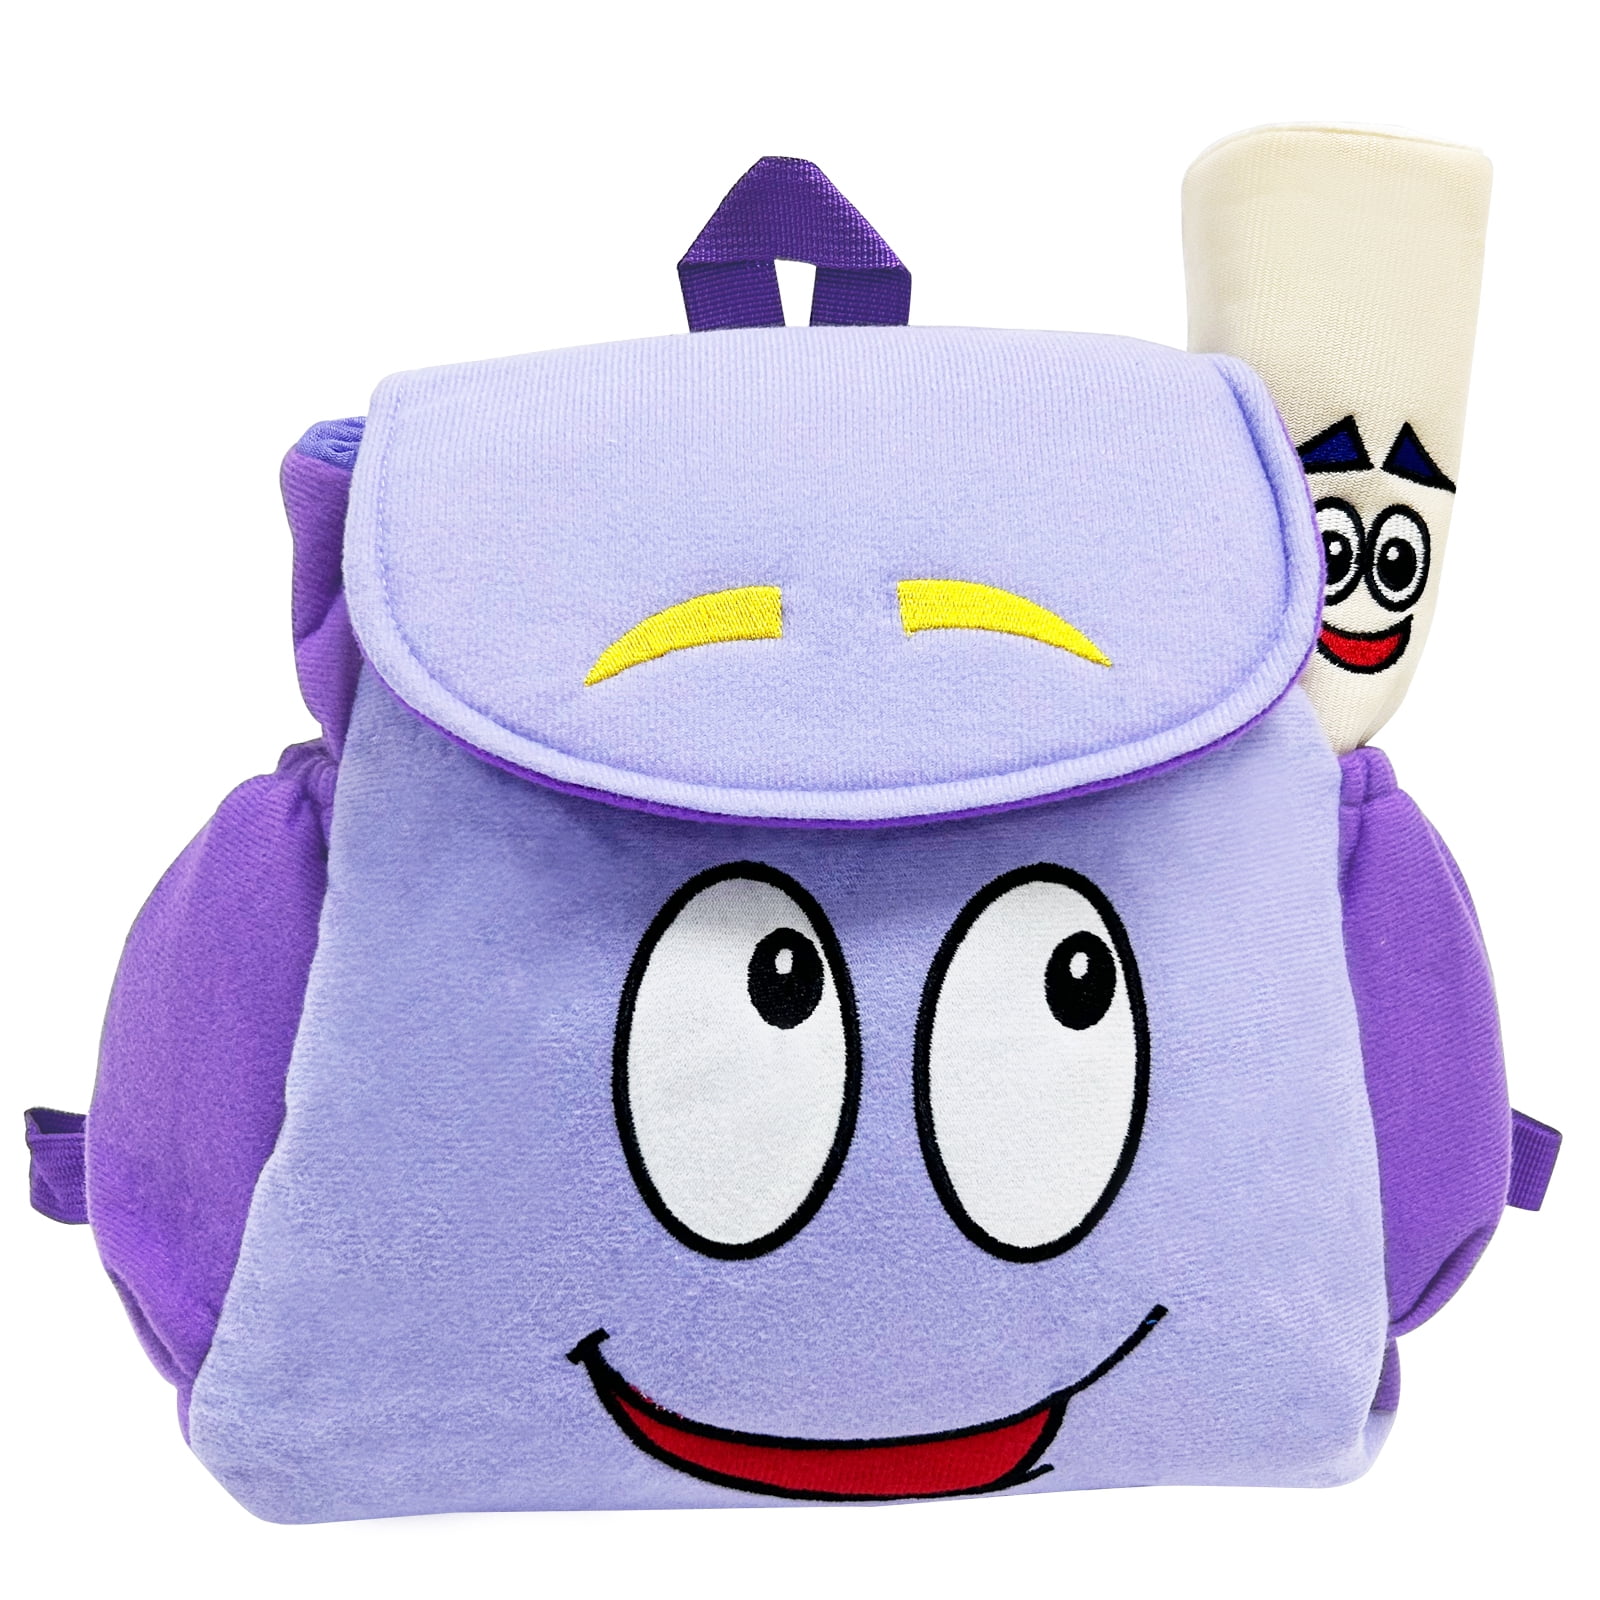 Dora Explorer Backpack, 9.5 Inches Explorer Backpack With Map, Plush ...